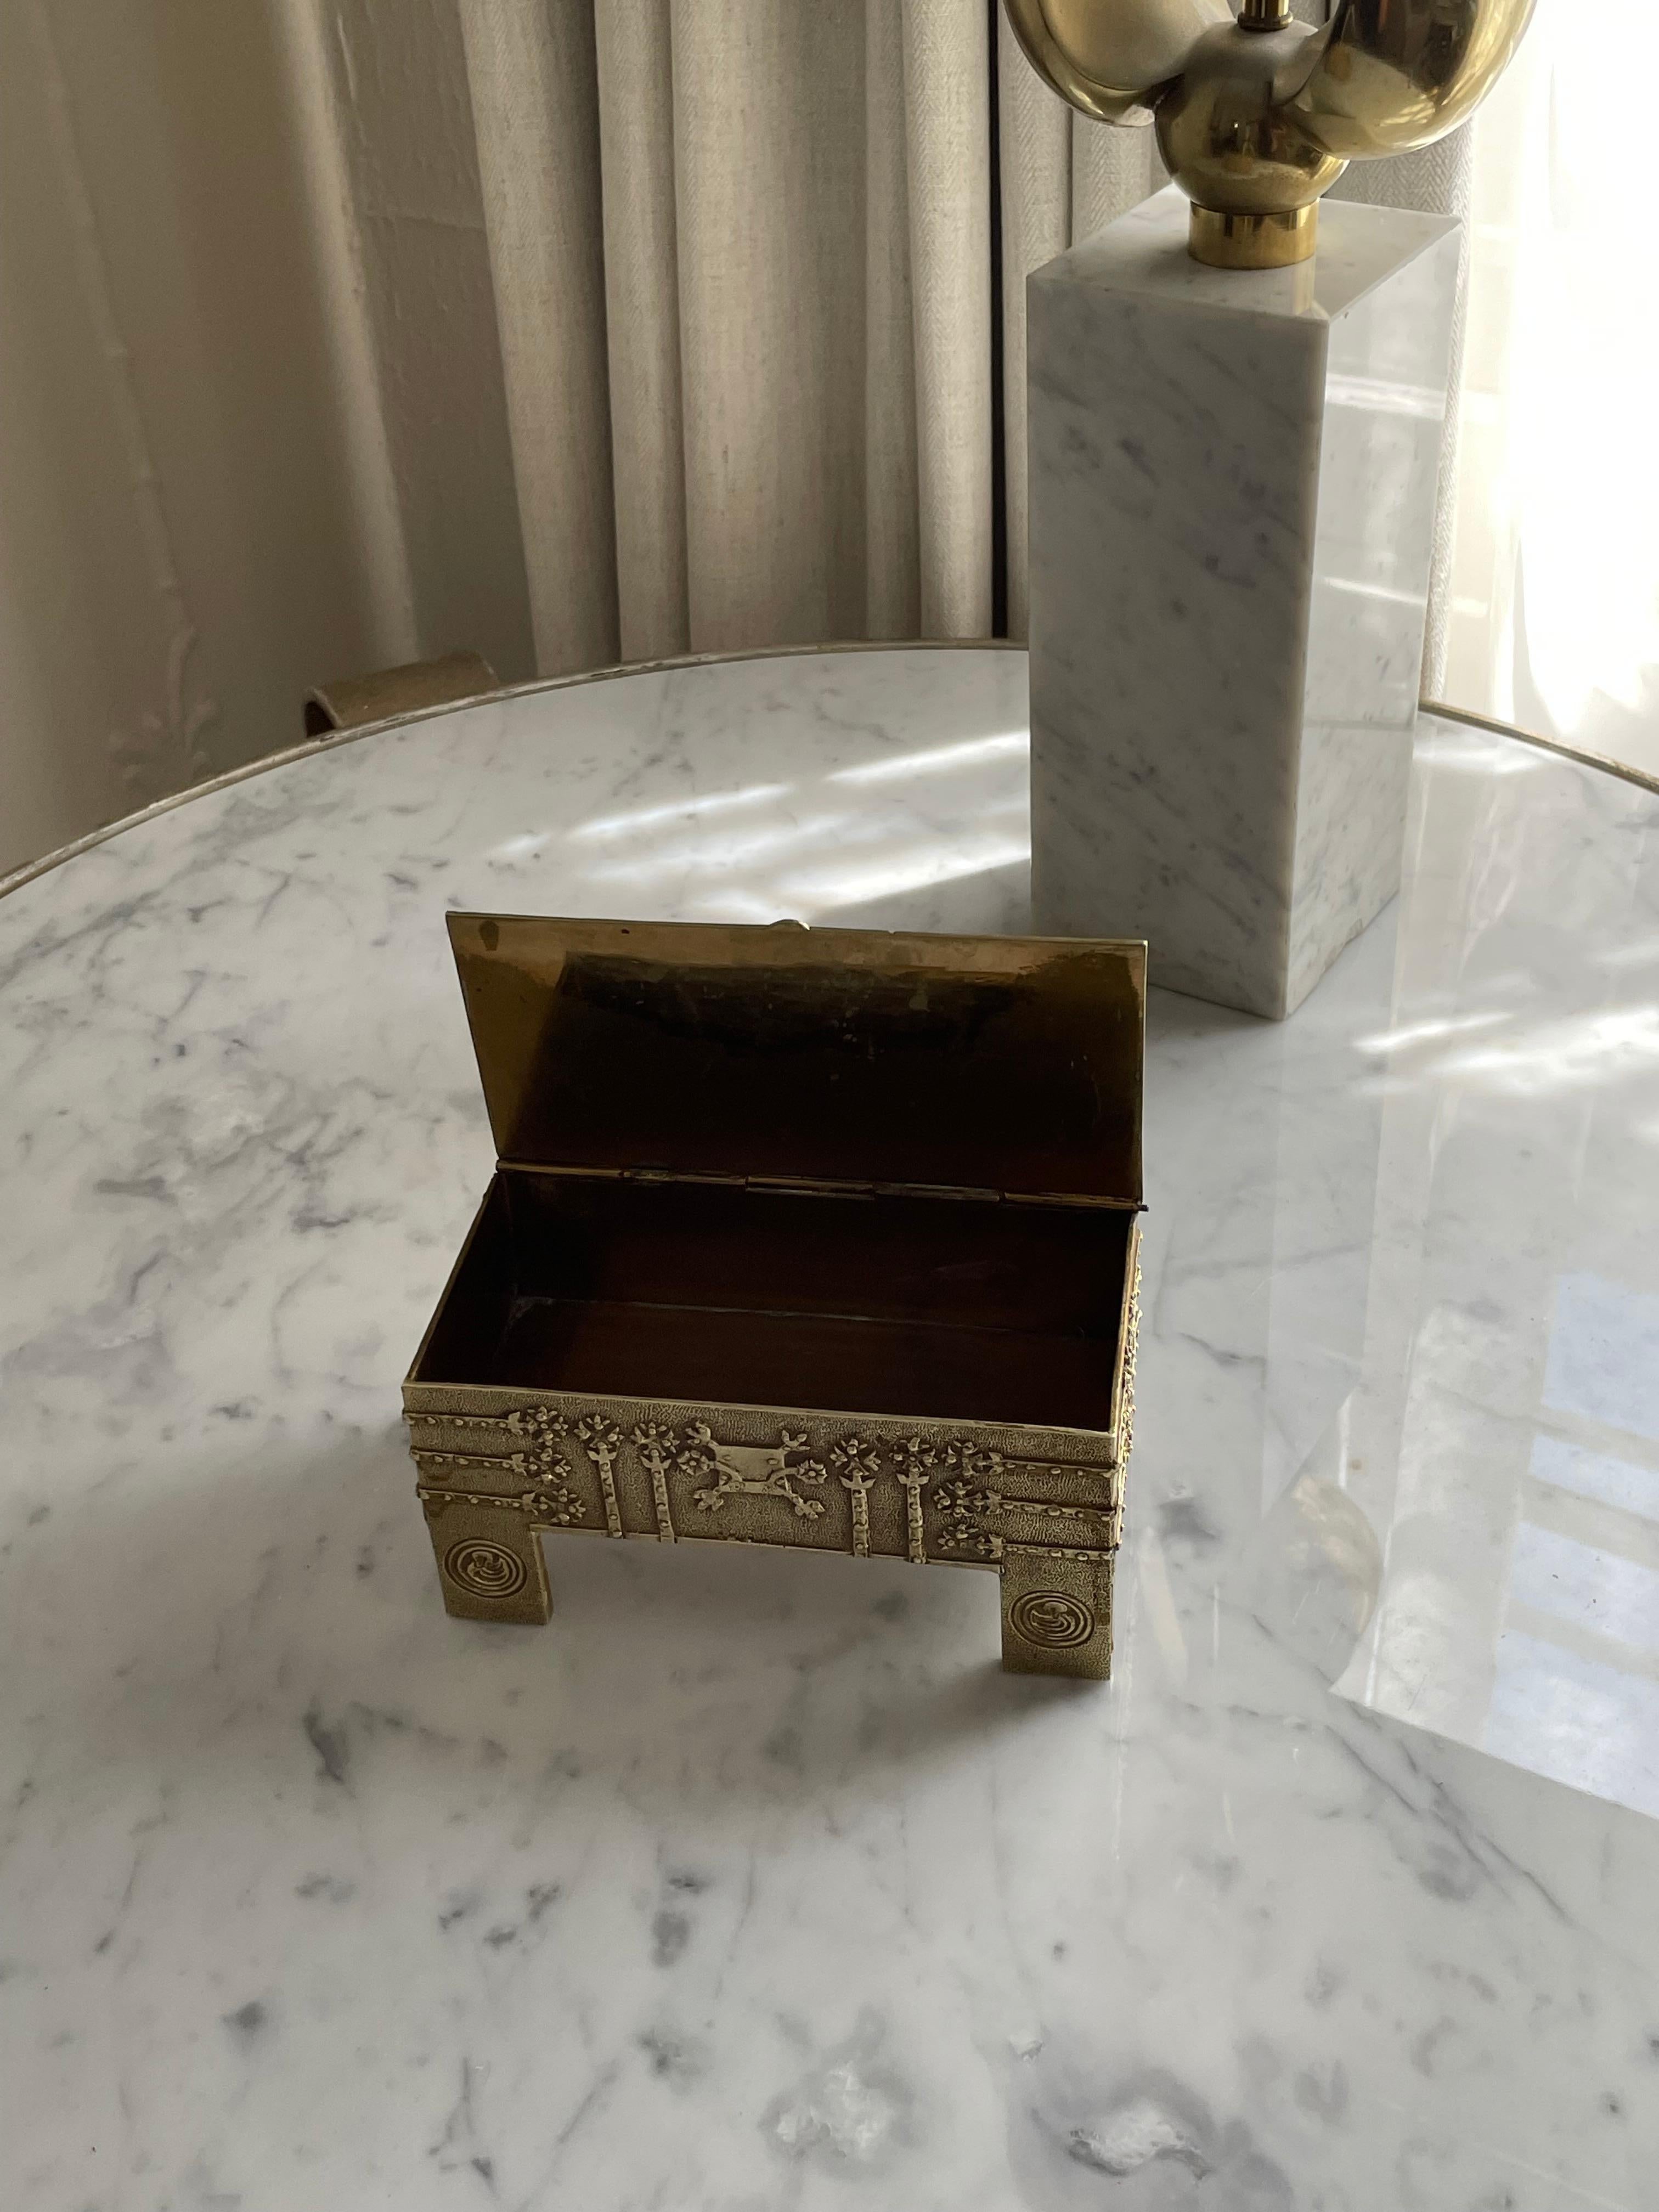 Lidded Brutalist Hand Made box in hammered brass with interesting floral details. Catches light beautifully - a complement to any surface. Can be used as a jewelry box, 420 stash box, or fortune cookie message collection! 

Hinged lid opens and